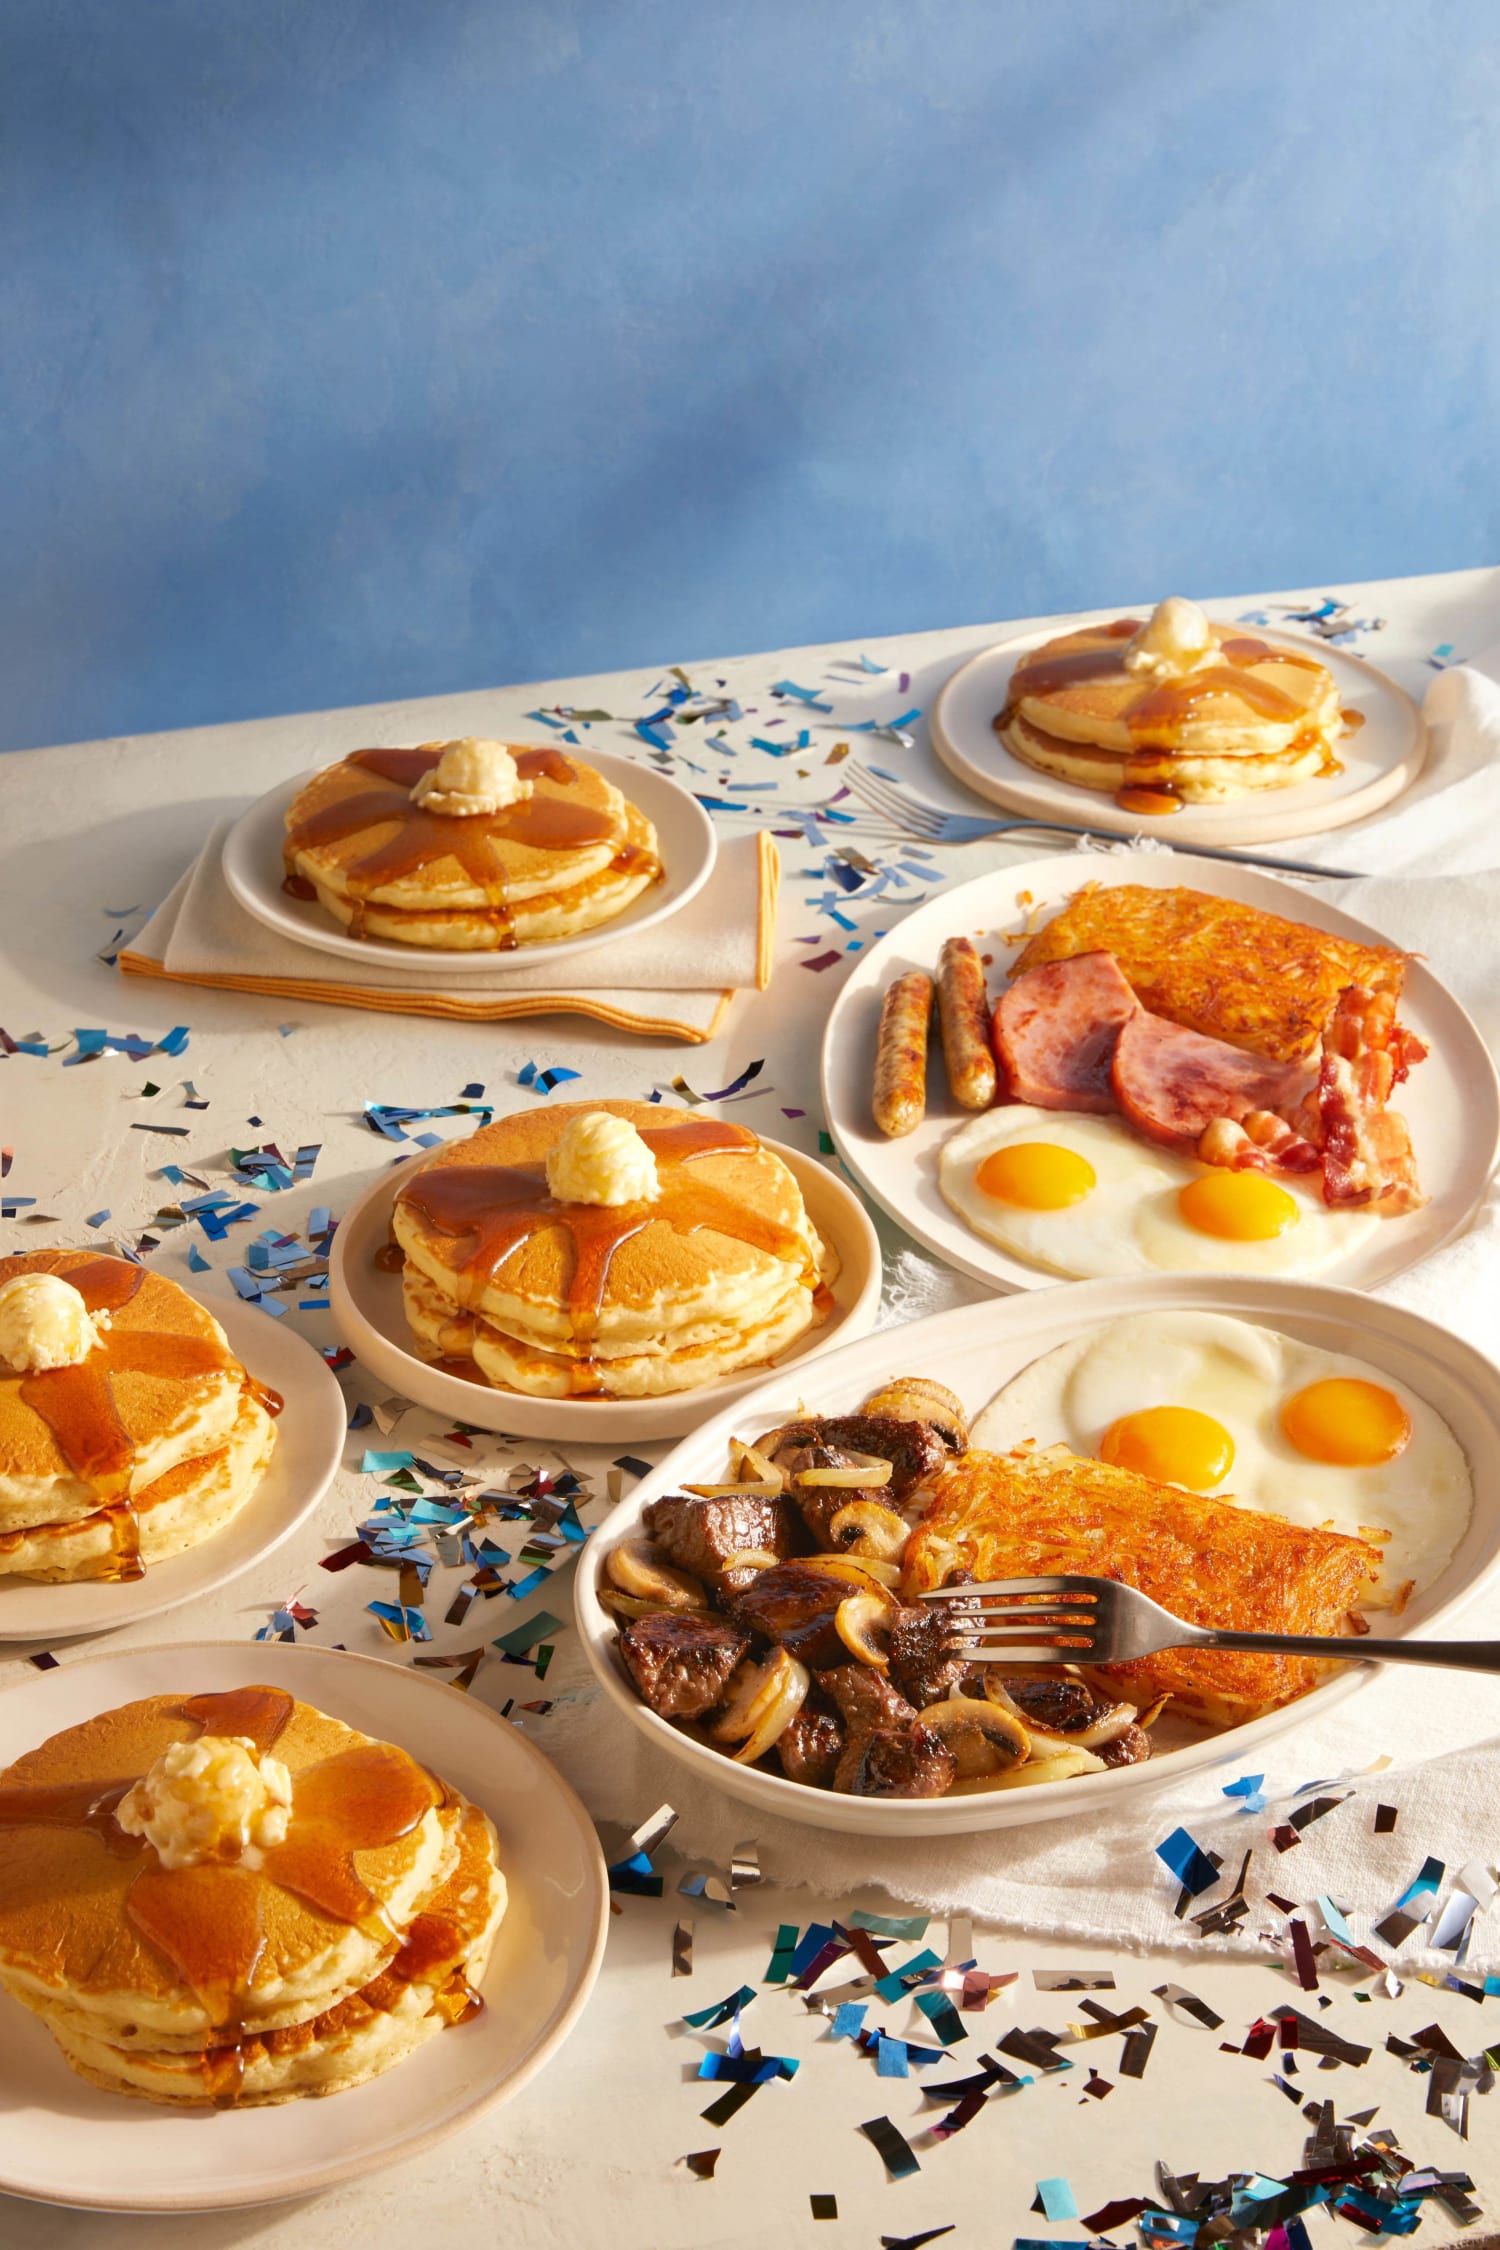 IHOP Celebrates 65 Years With $5 All-You-Can-Eat Pancakes Deal